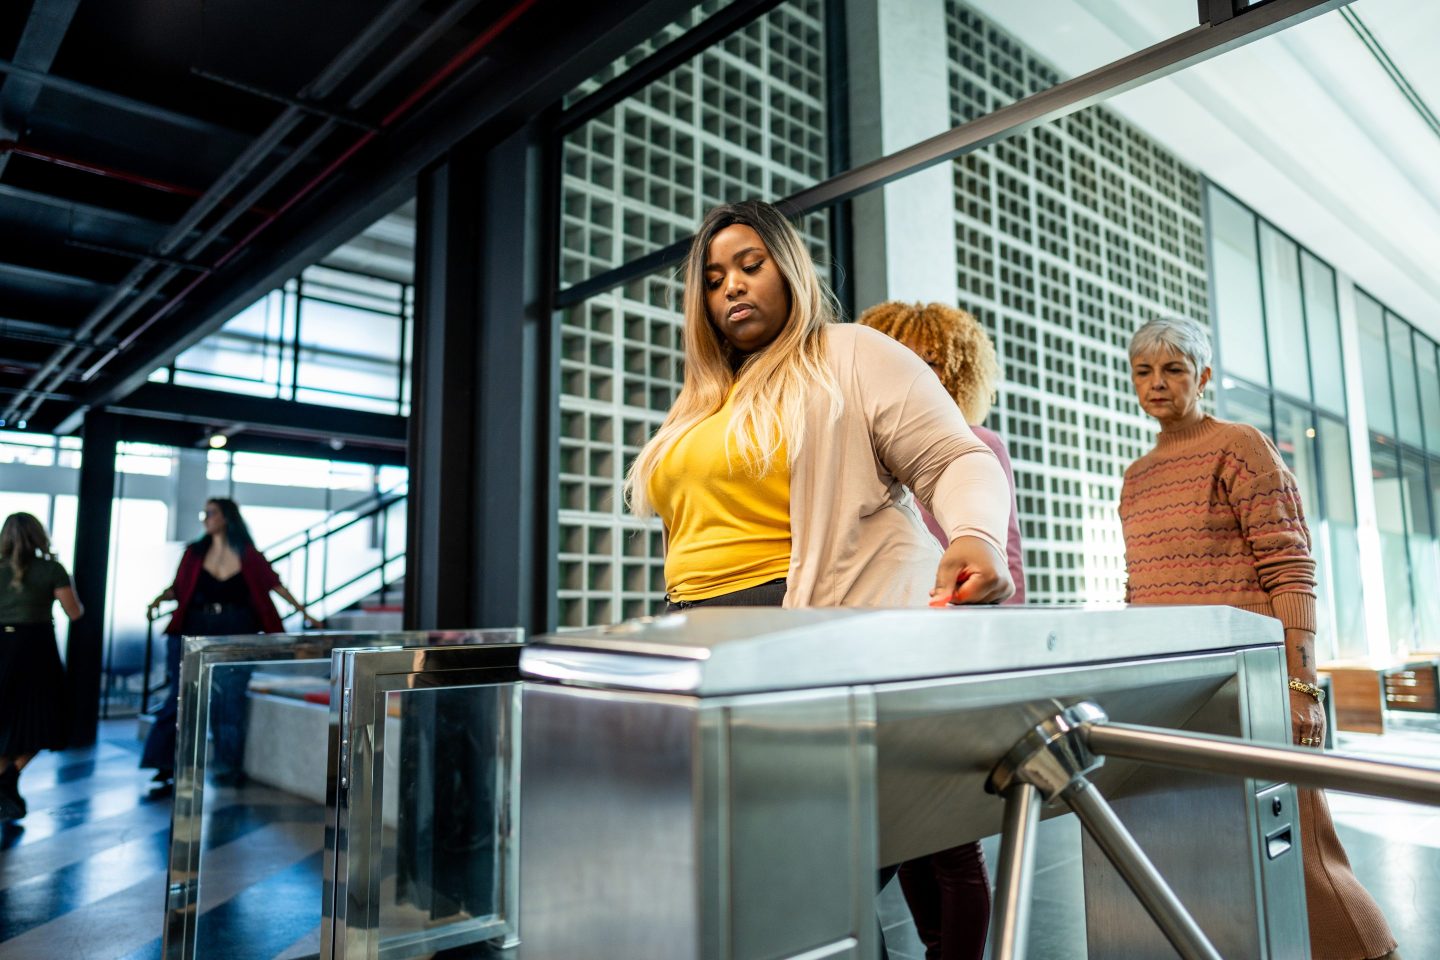 Young woman passing through the turnstile at the office entrance